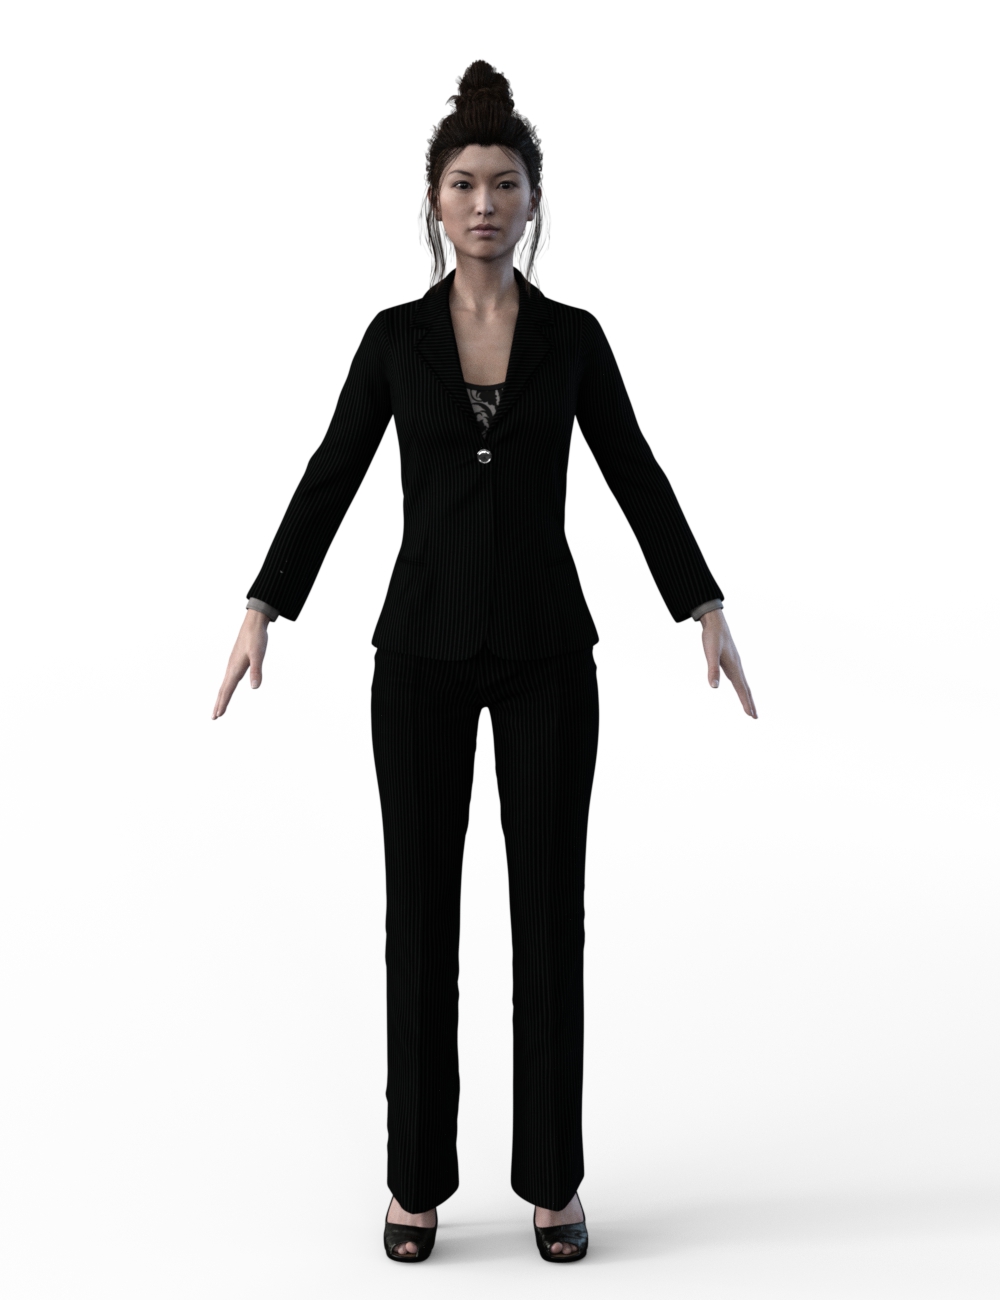 FBX- Mei Lin New York Business Outfit by: Paleo, 3D Models by Daz 3D